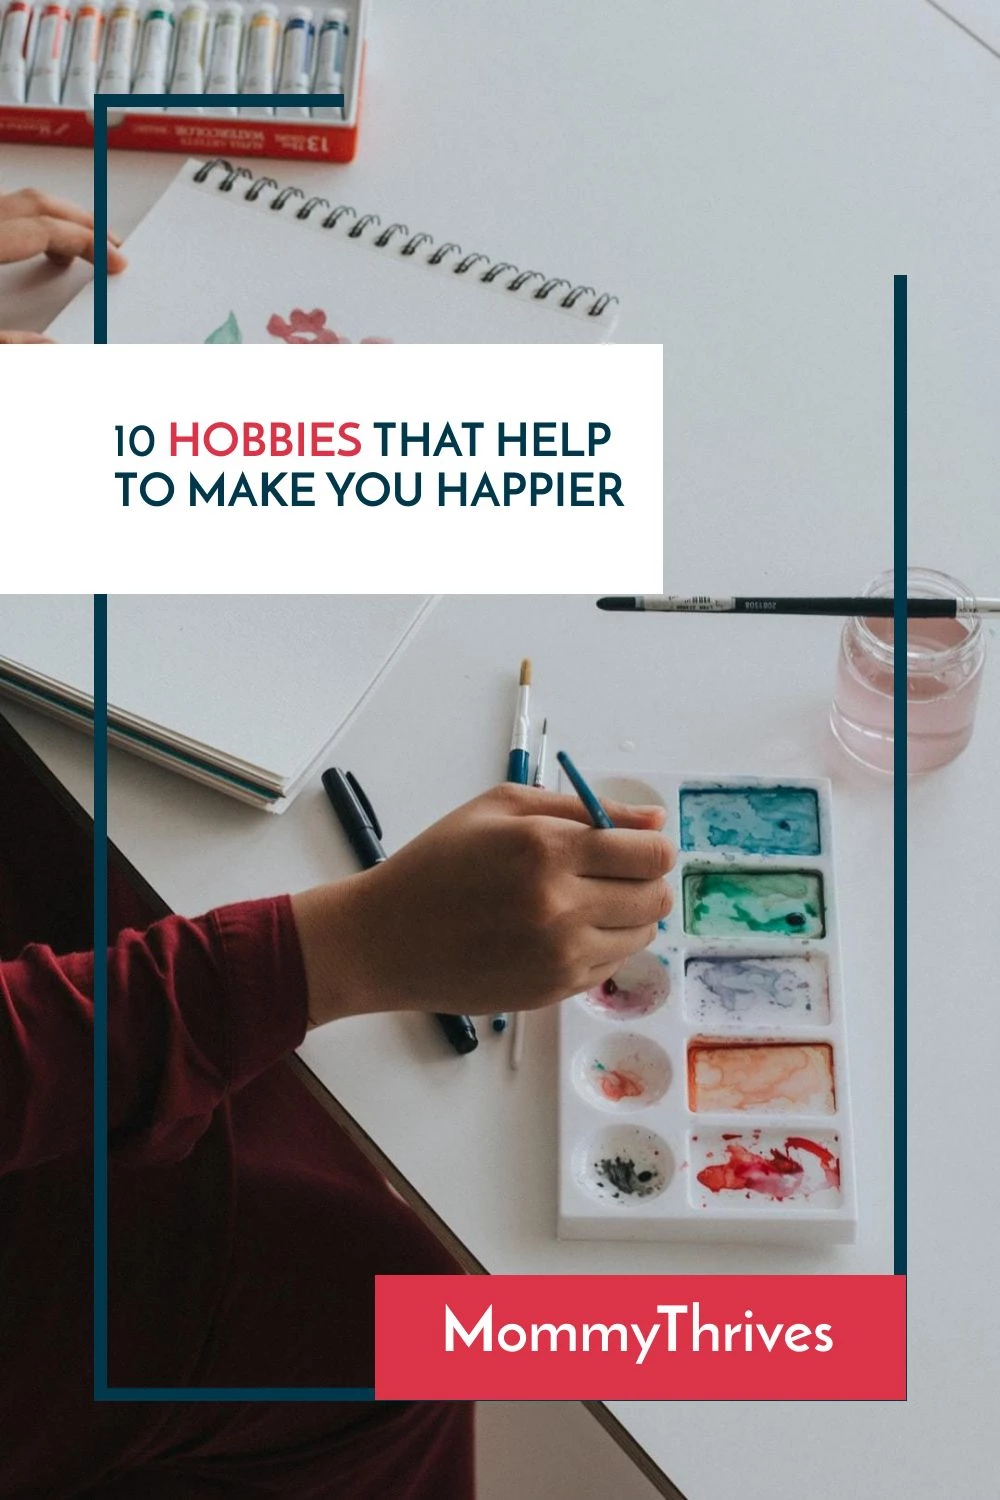 At Home Hobbies For Adults To Learn - List Of Hobbies To Try - Fun Hobby Ideas That Improve Your Mood